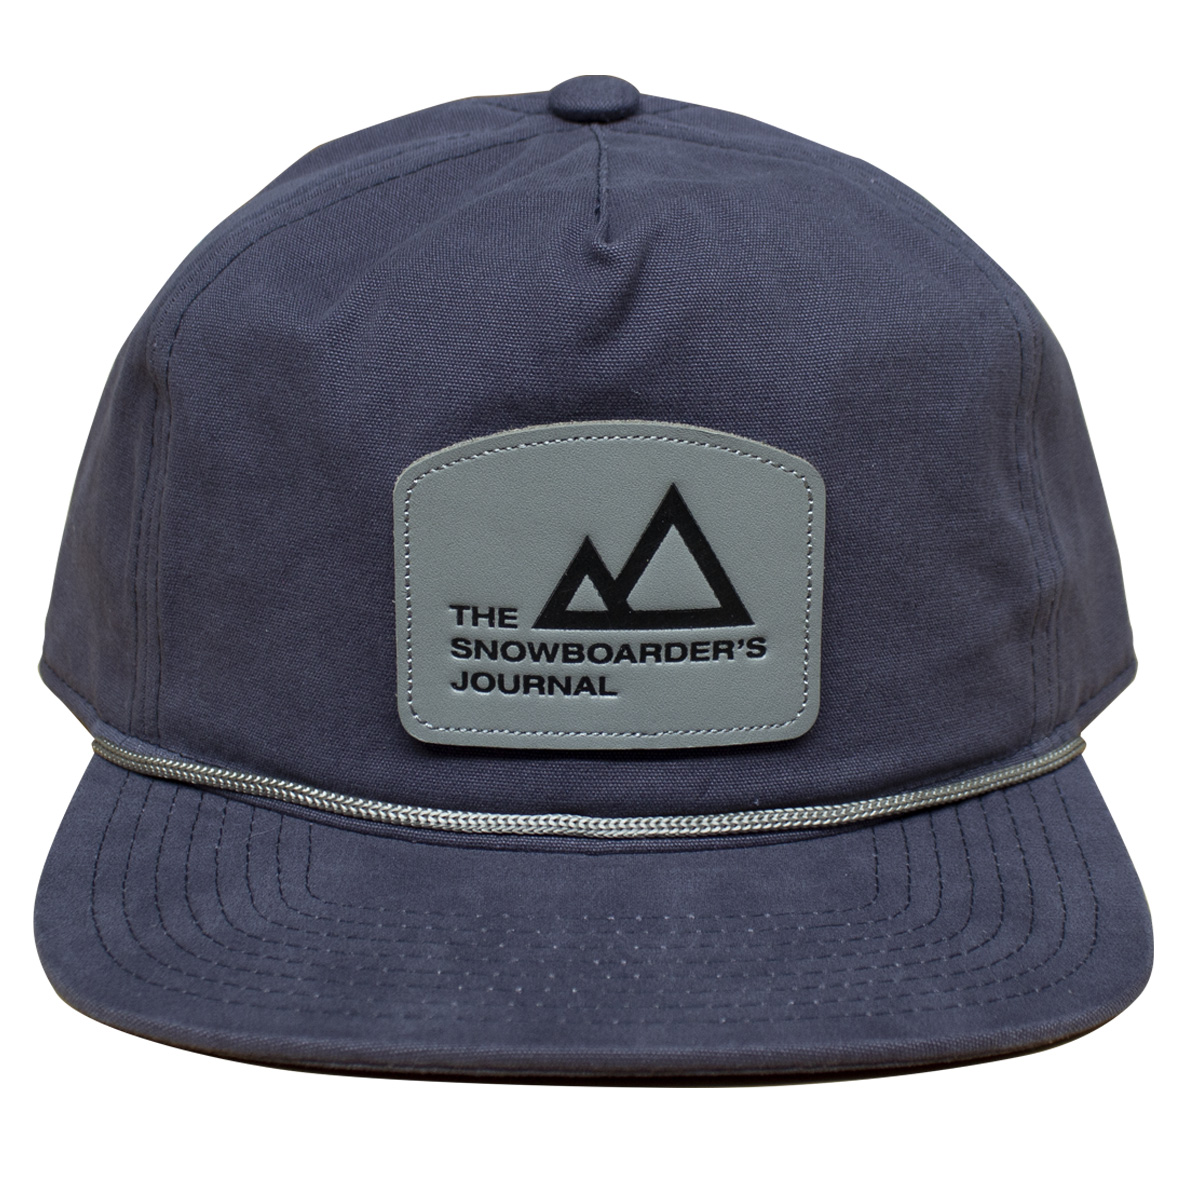 Hat with Hat Patches  Created at the Ridge